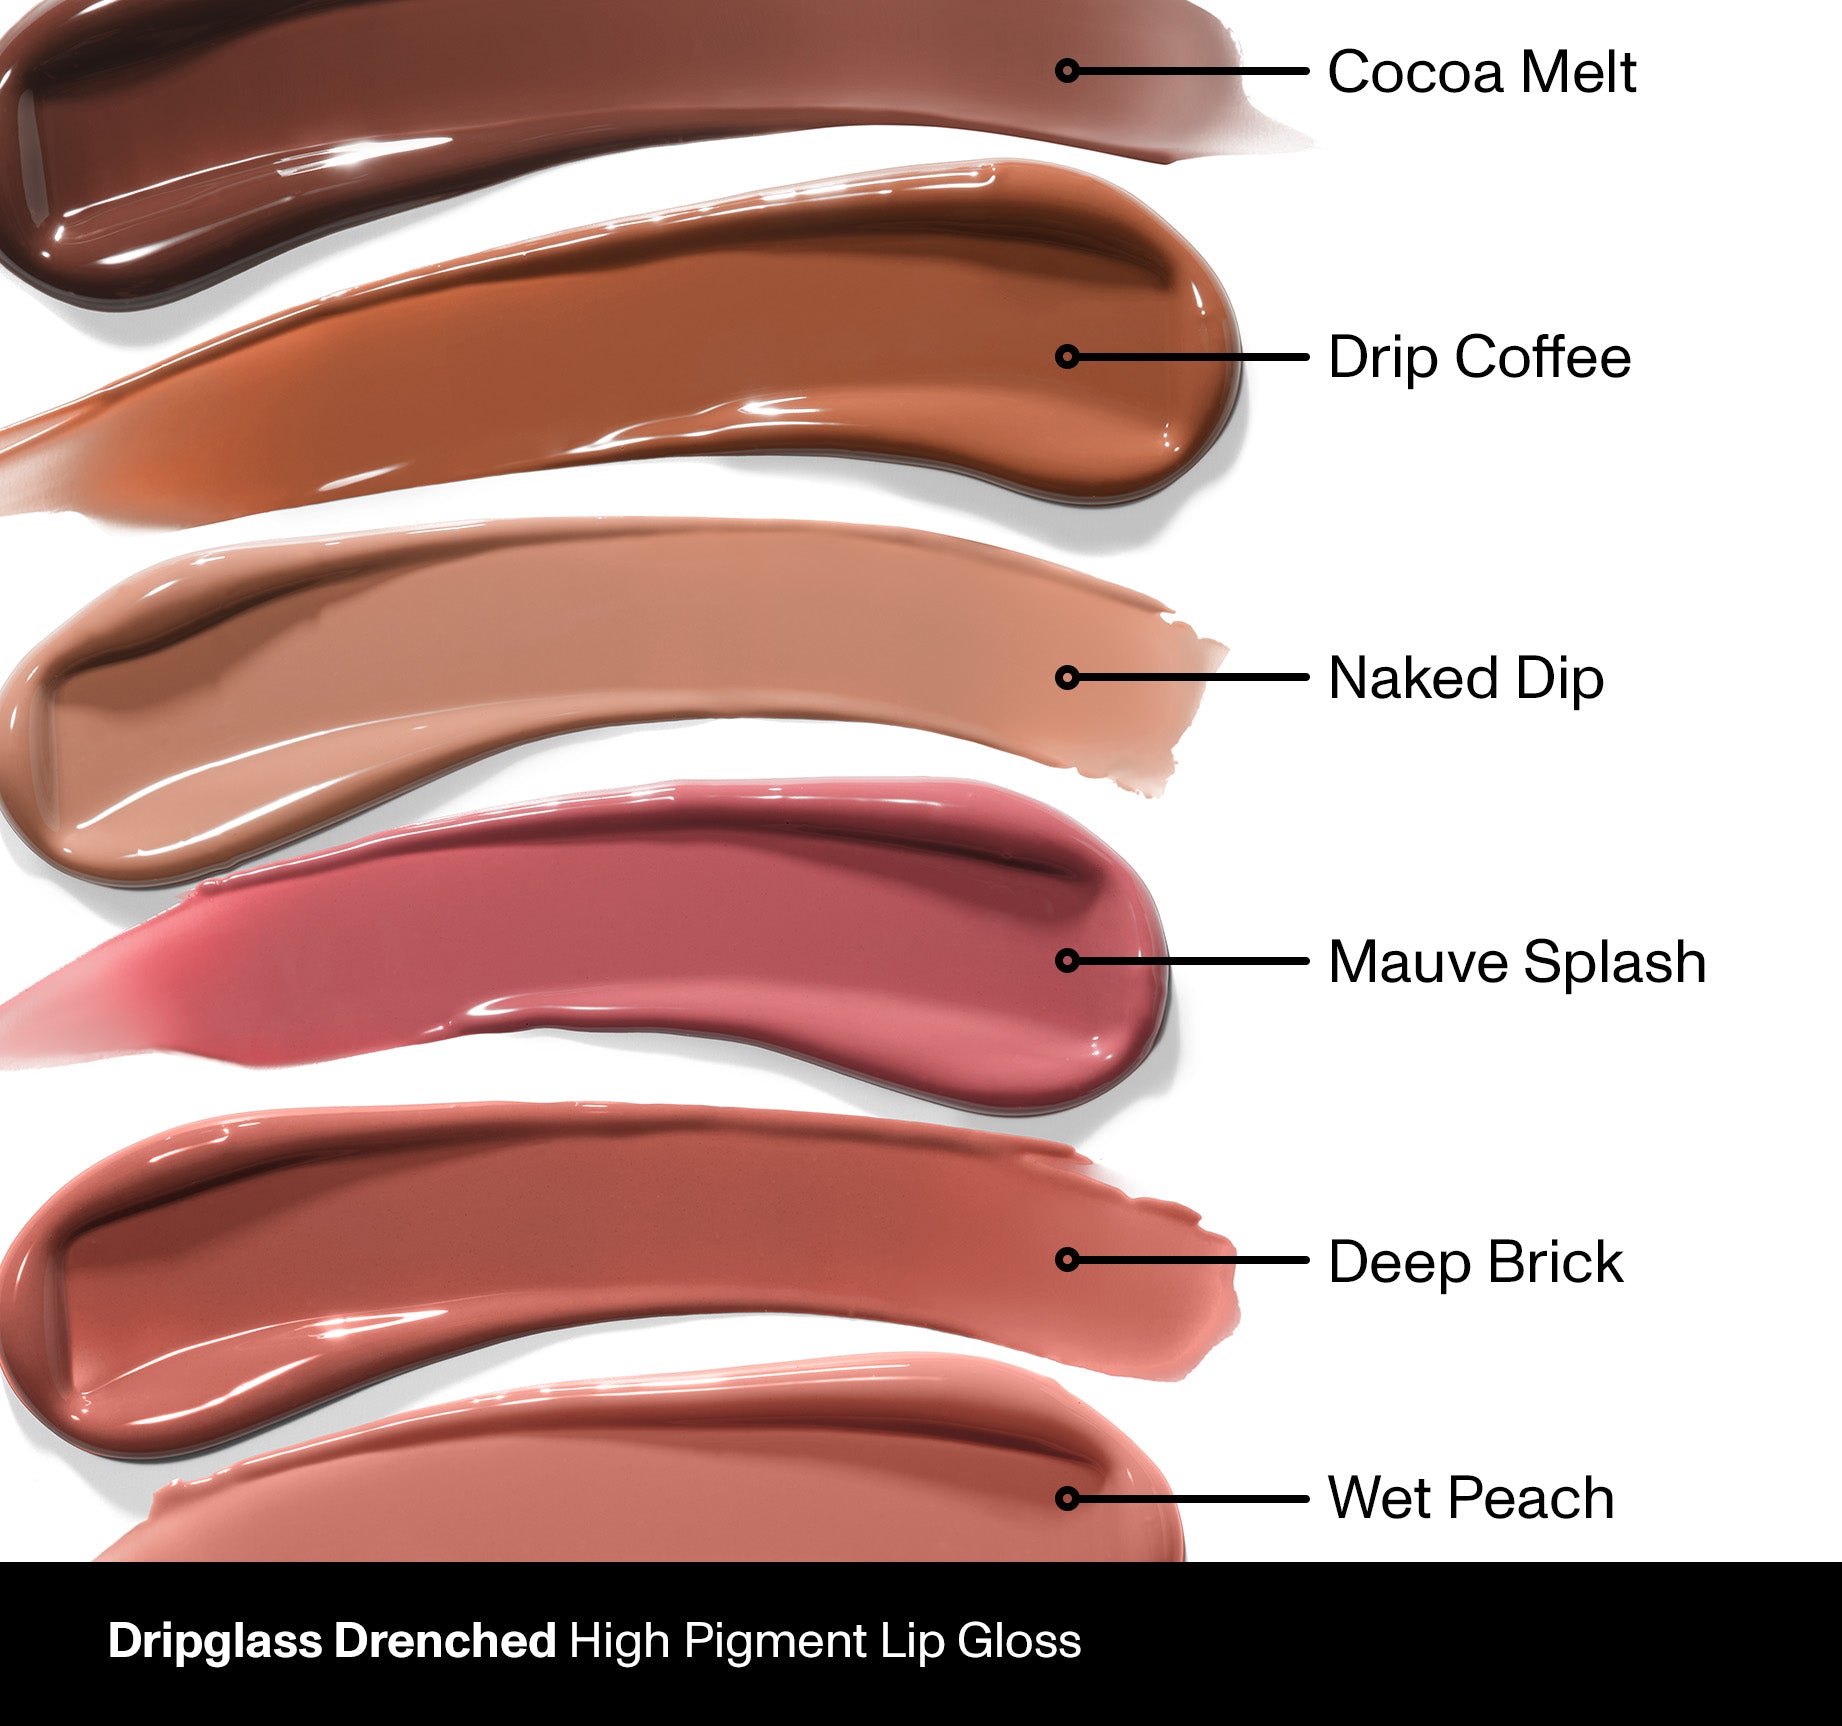 Dripglass Drenched High Pigment Lip Gloss - Naked Dip - Image 6